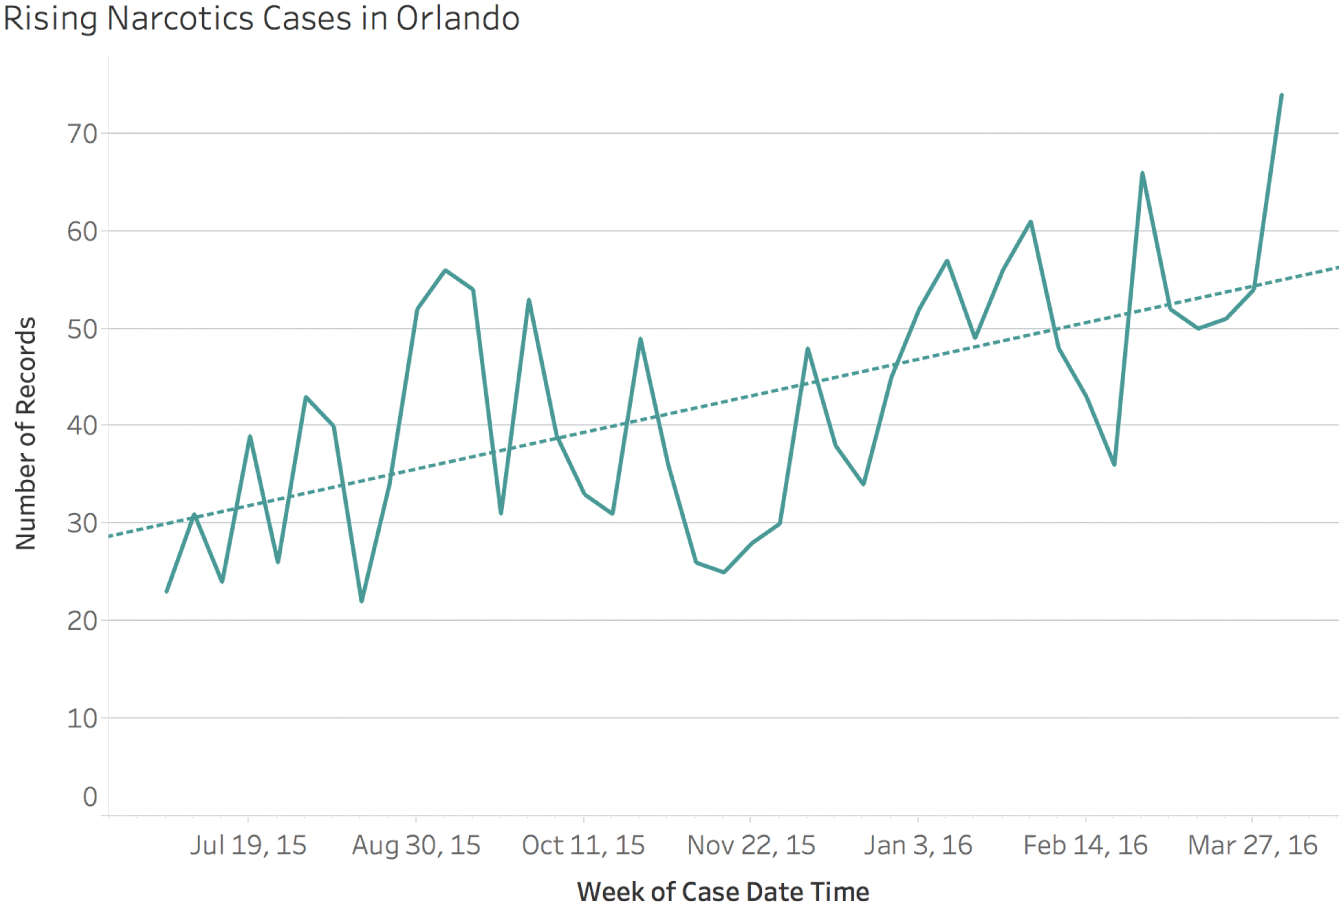 Graph depicting the reported cases of narcotics crimes in Orlando for 41 weeks, from June 2015 to April 2016.